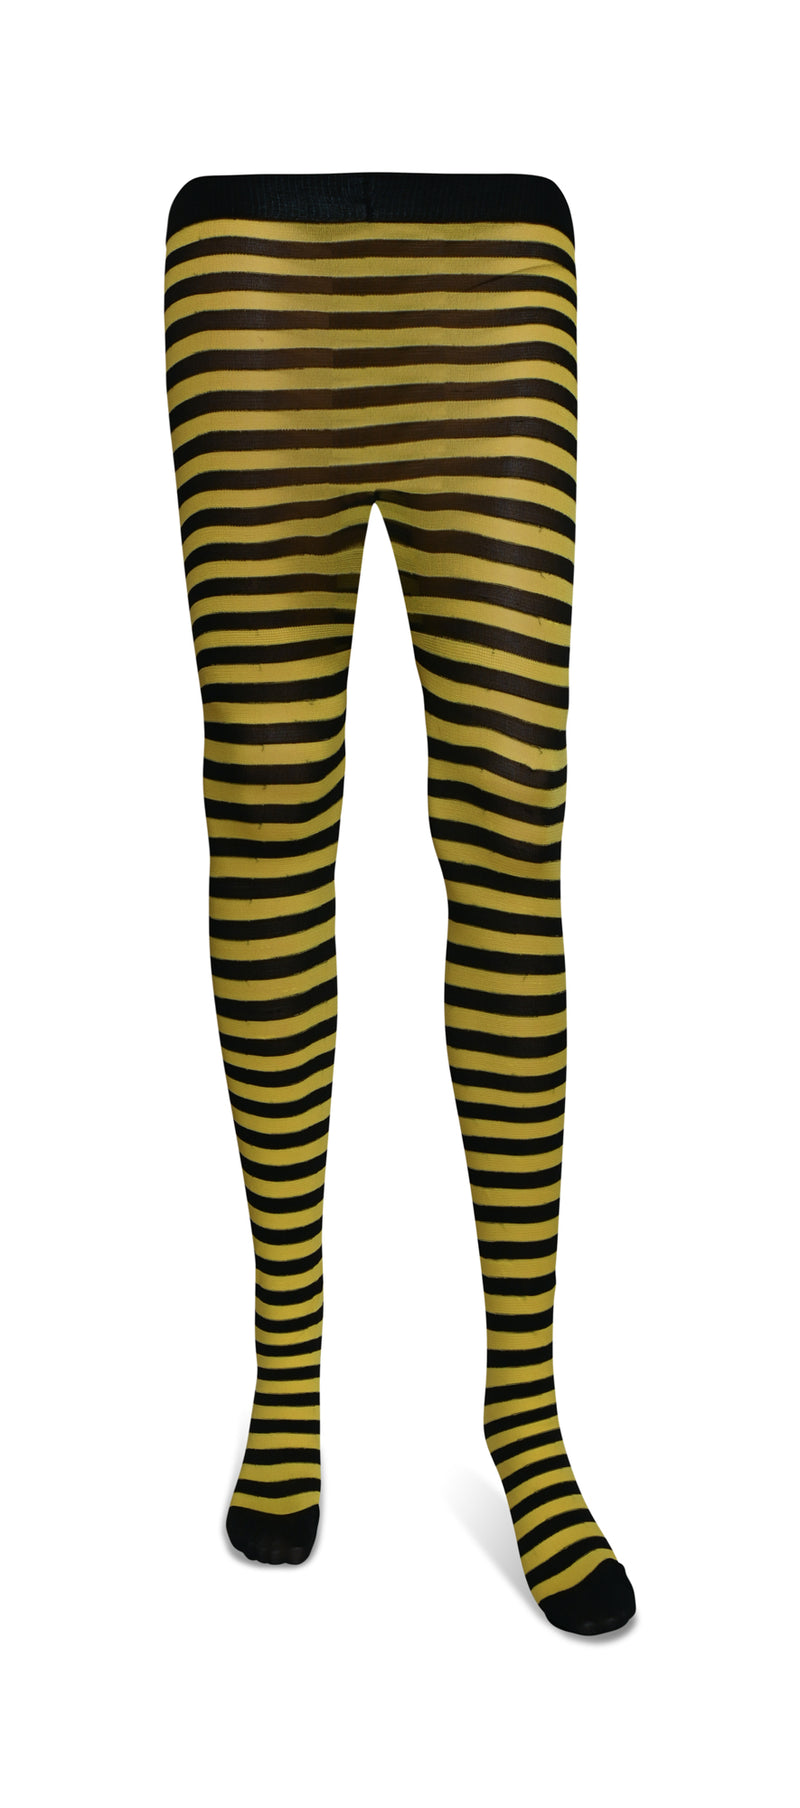 Black and Yellow Tights - Striped Nylon Bumble Bee Stretch Pantyhose Stocking Accessories for Every Day Attire and Costumes for Men, Women and Kids